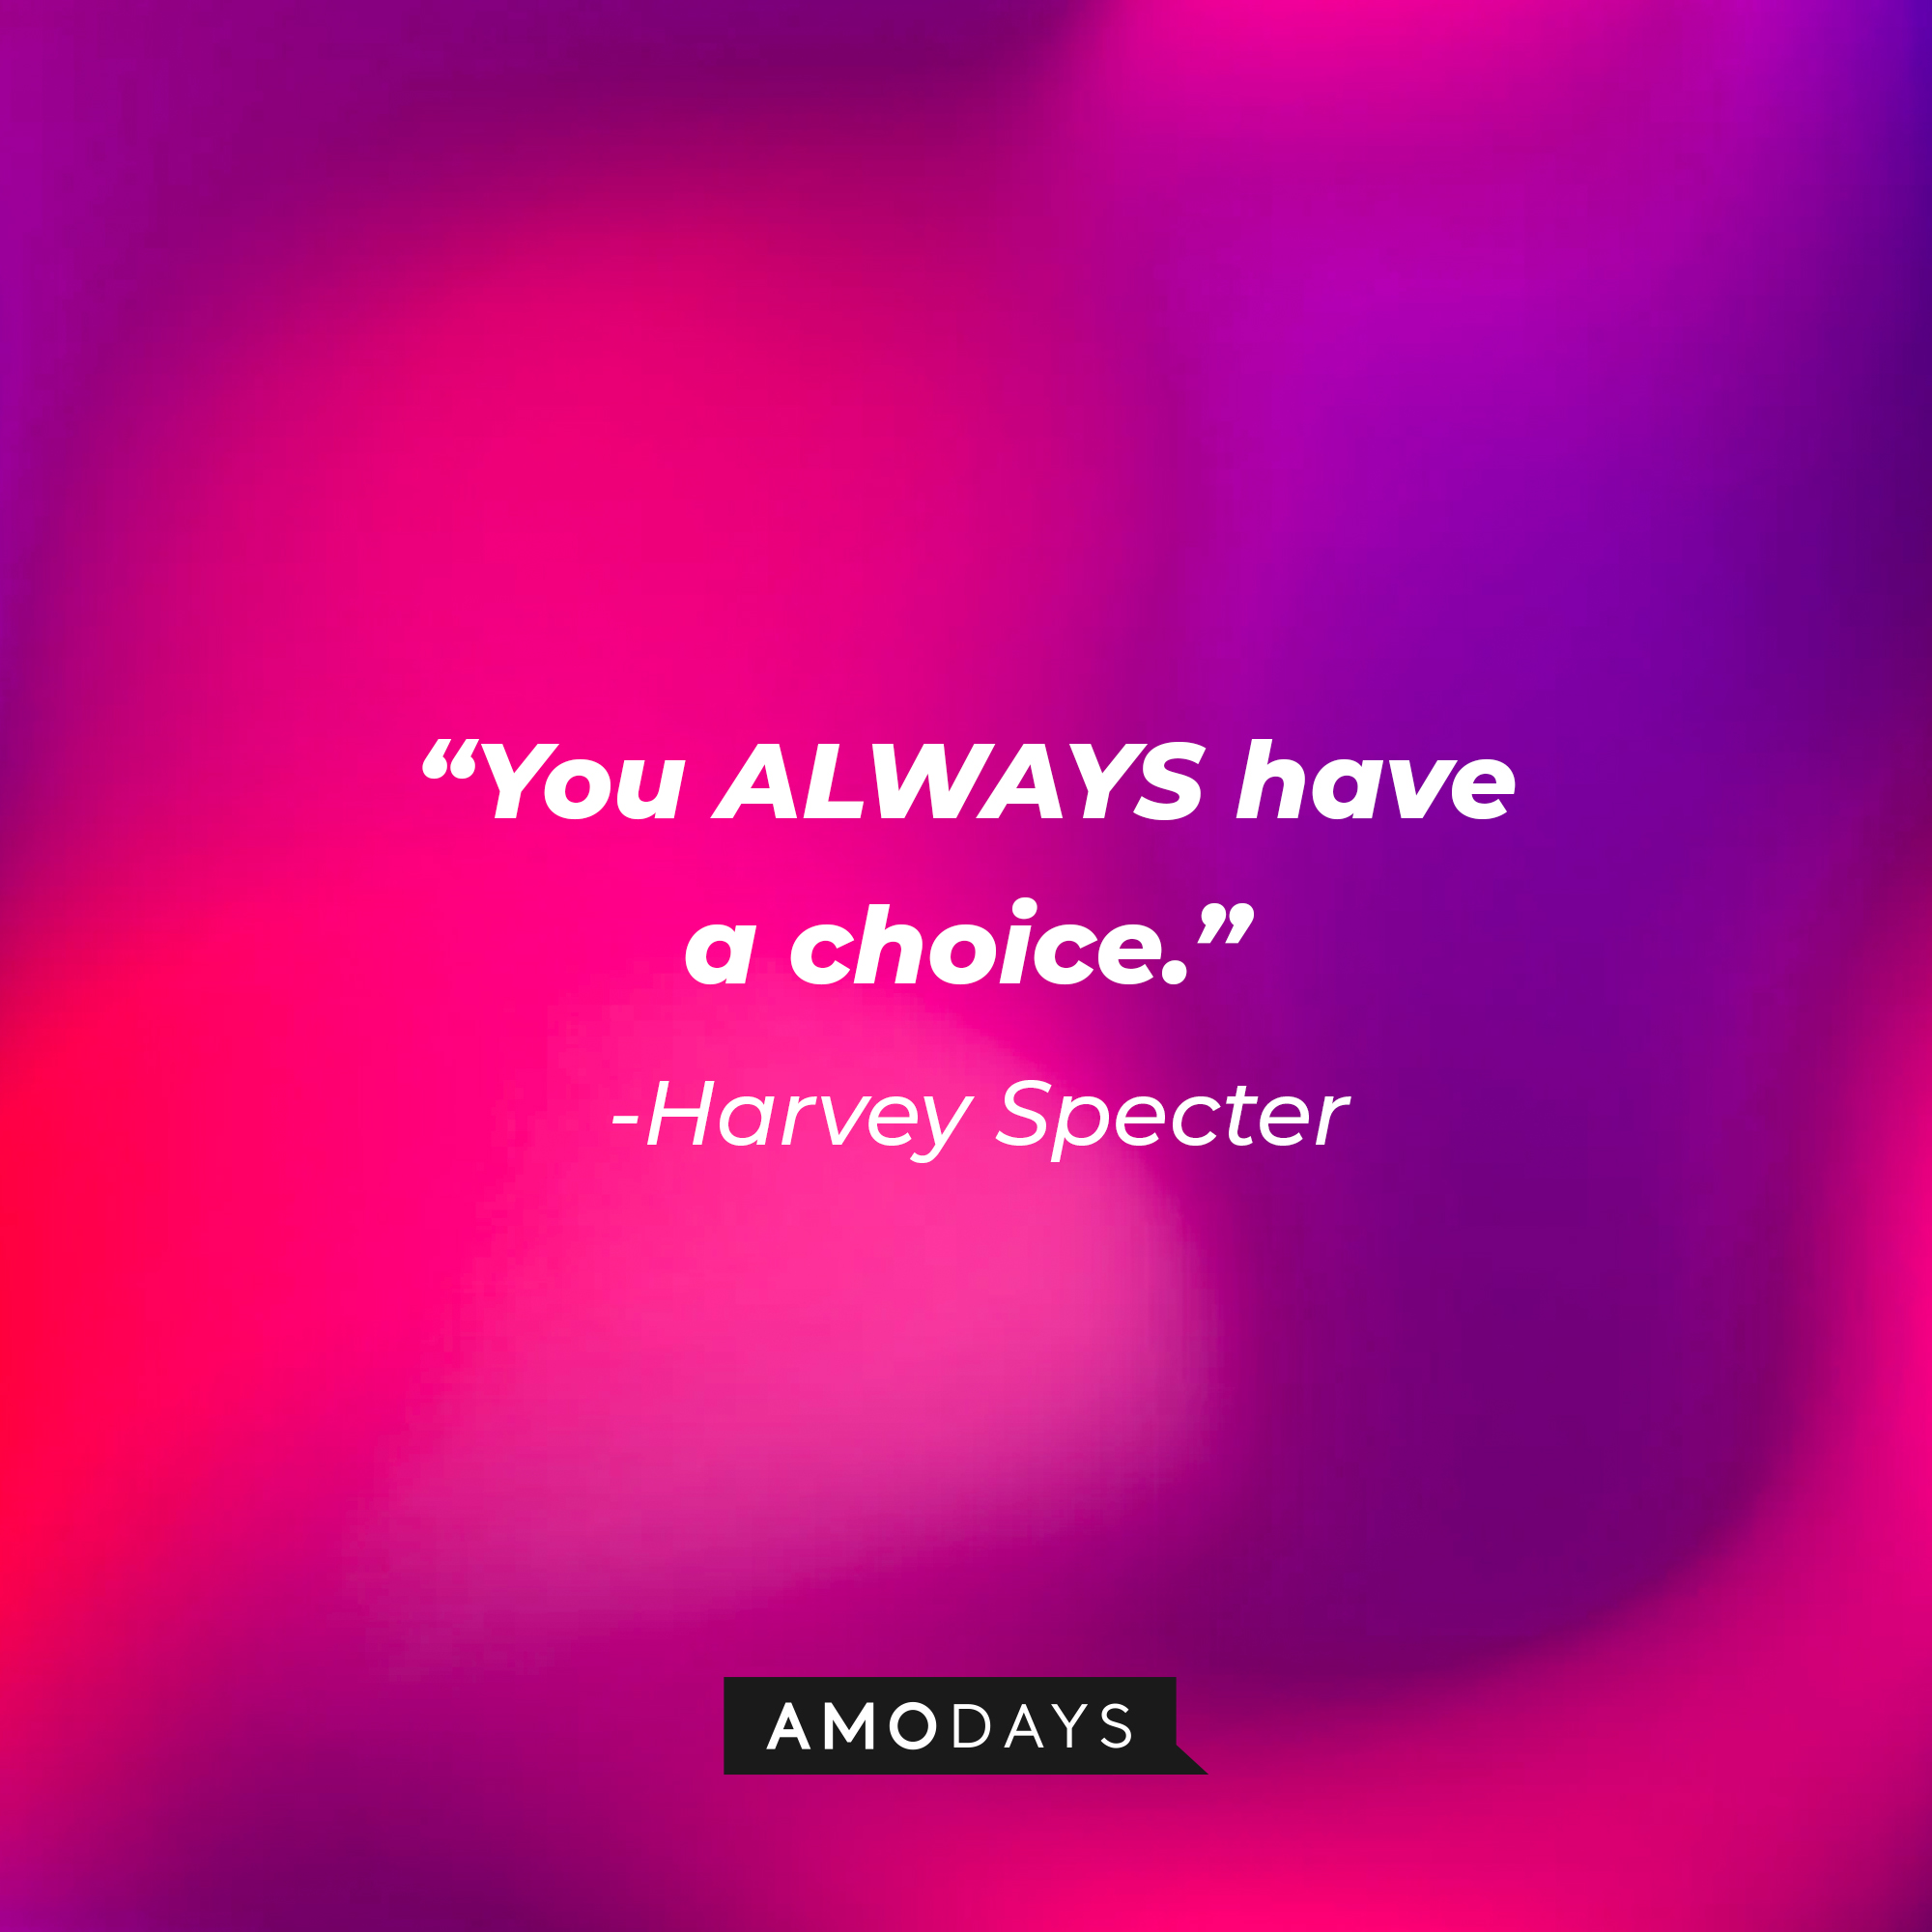 Harvey Specter's quote from "Suits" : "You ALWAYS have a choice." | Source: Amodays